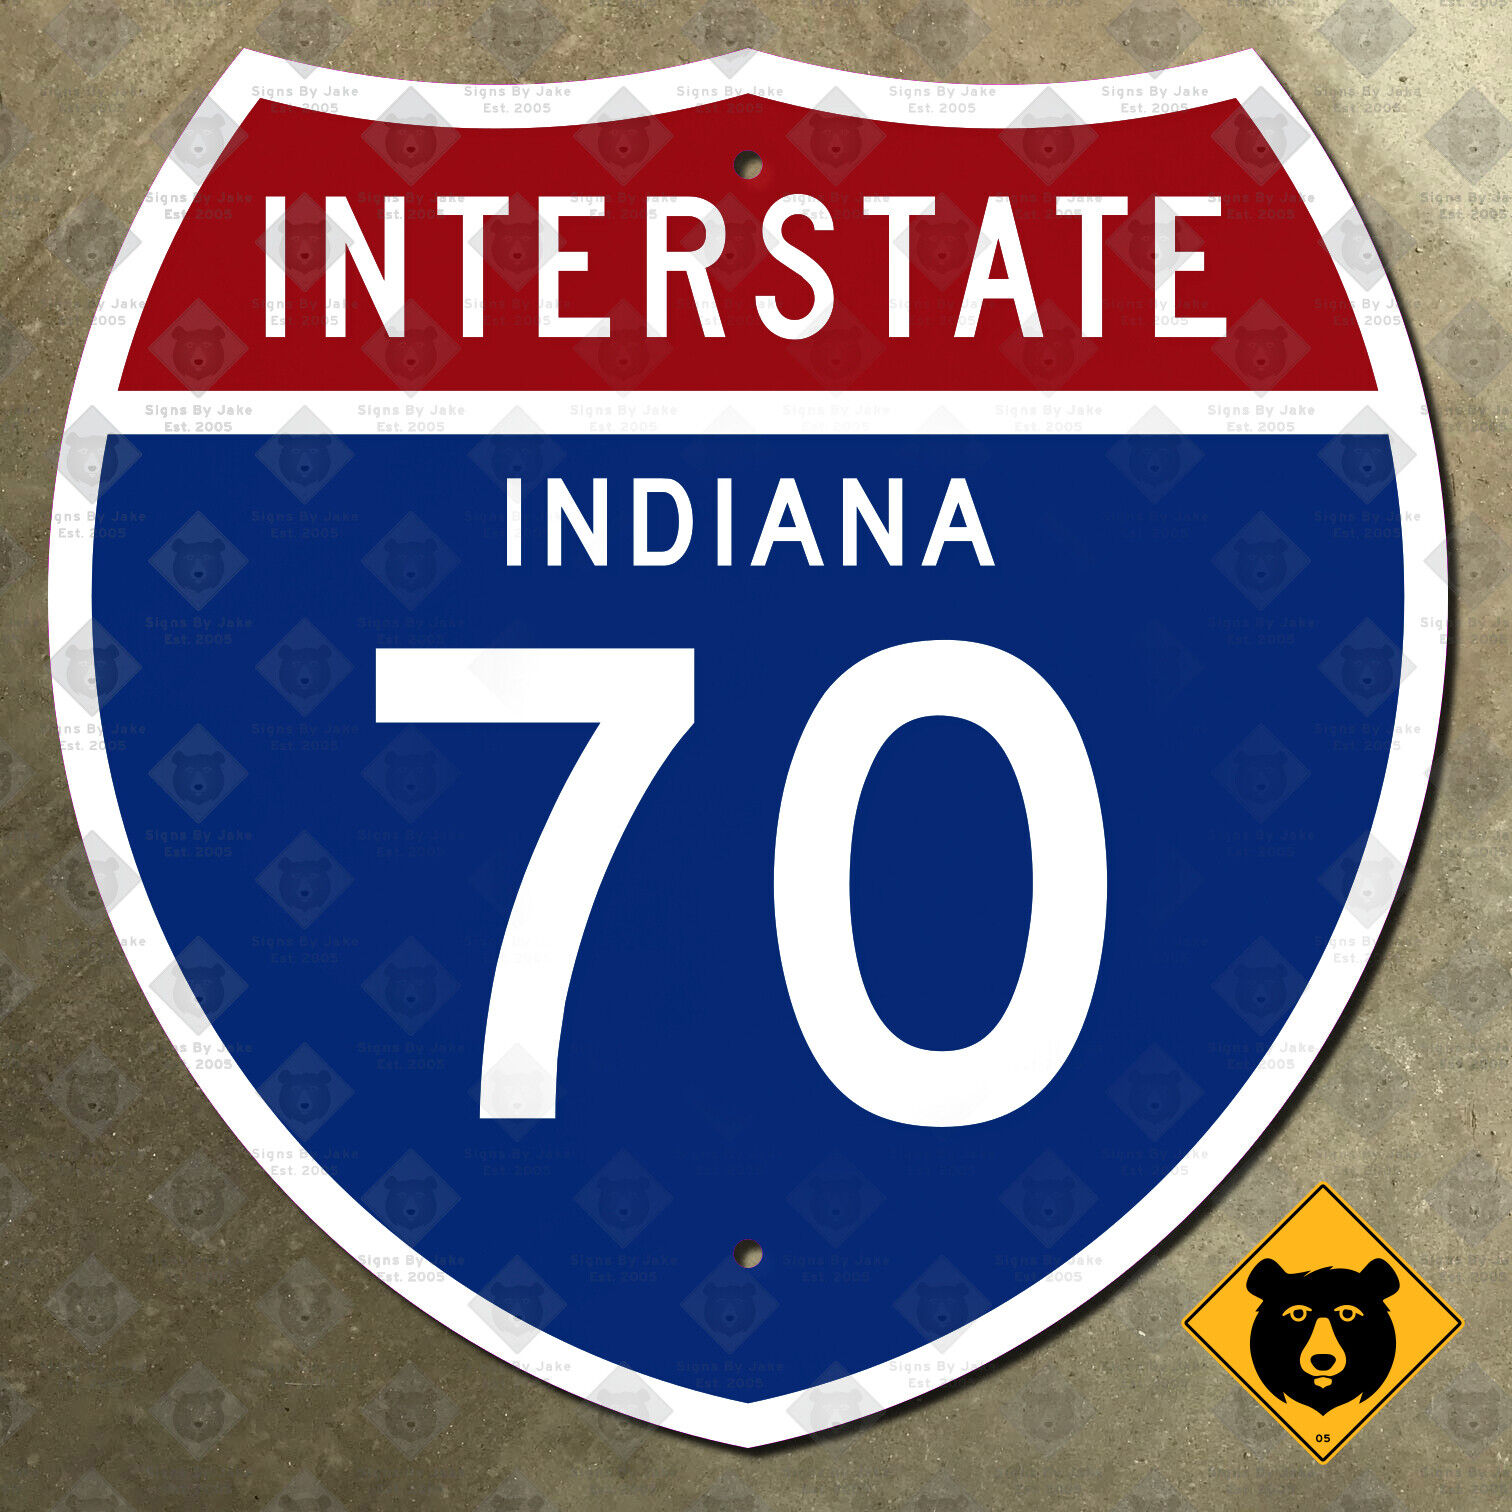 Indiana interstate 70 road sign highway 1957 Terre Haute Indianapolis 24x24